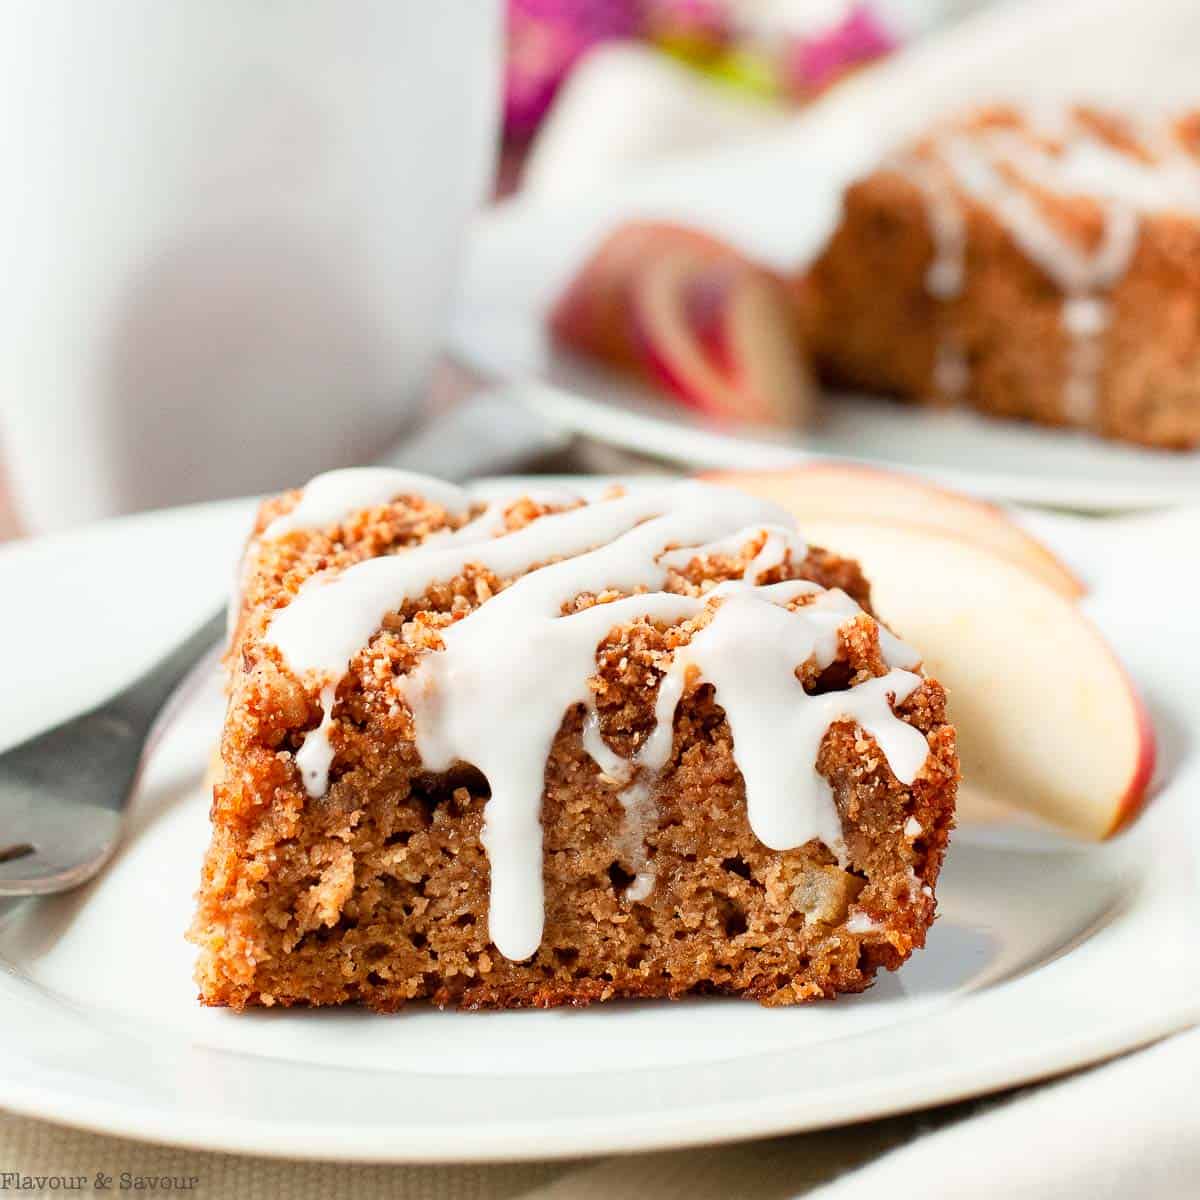 Apple Coffee Cake with Cinnamon Streusel Topping - Fed & Fit